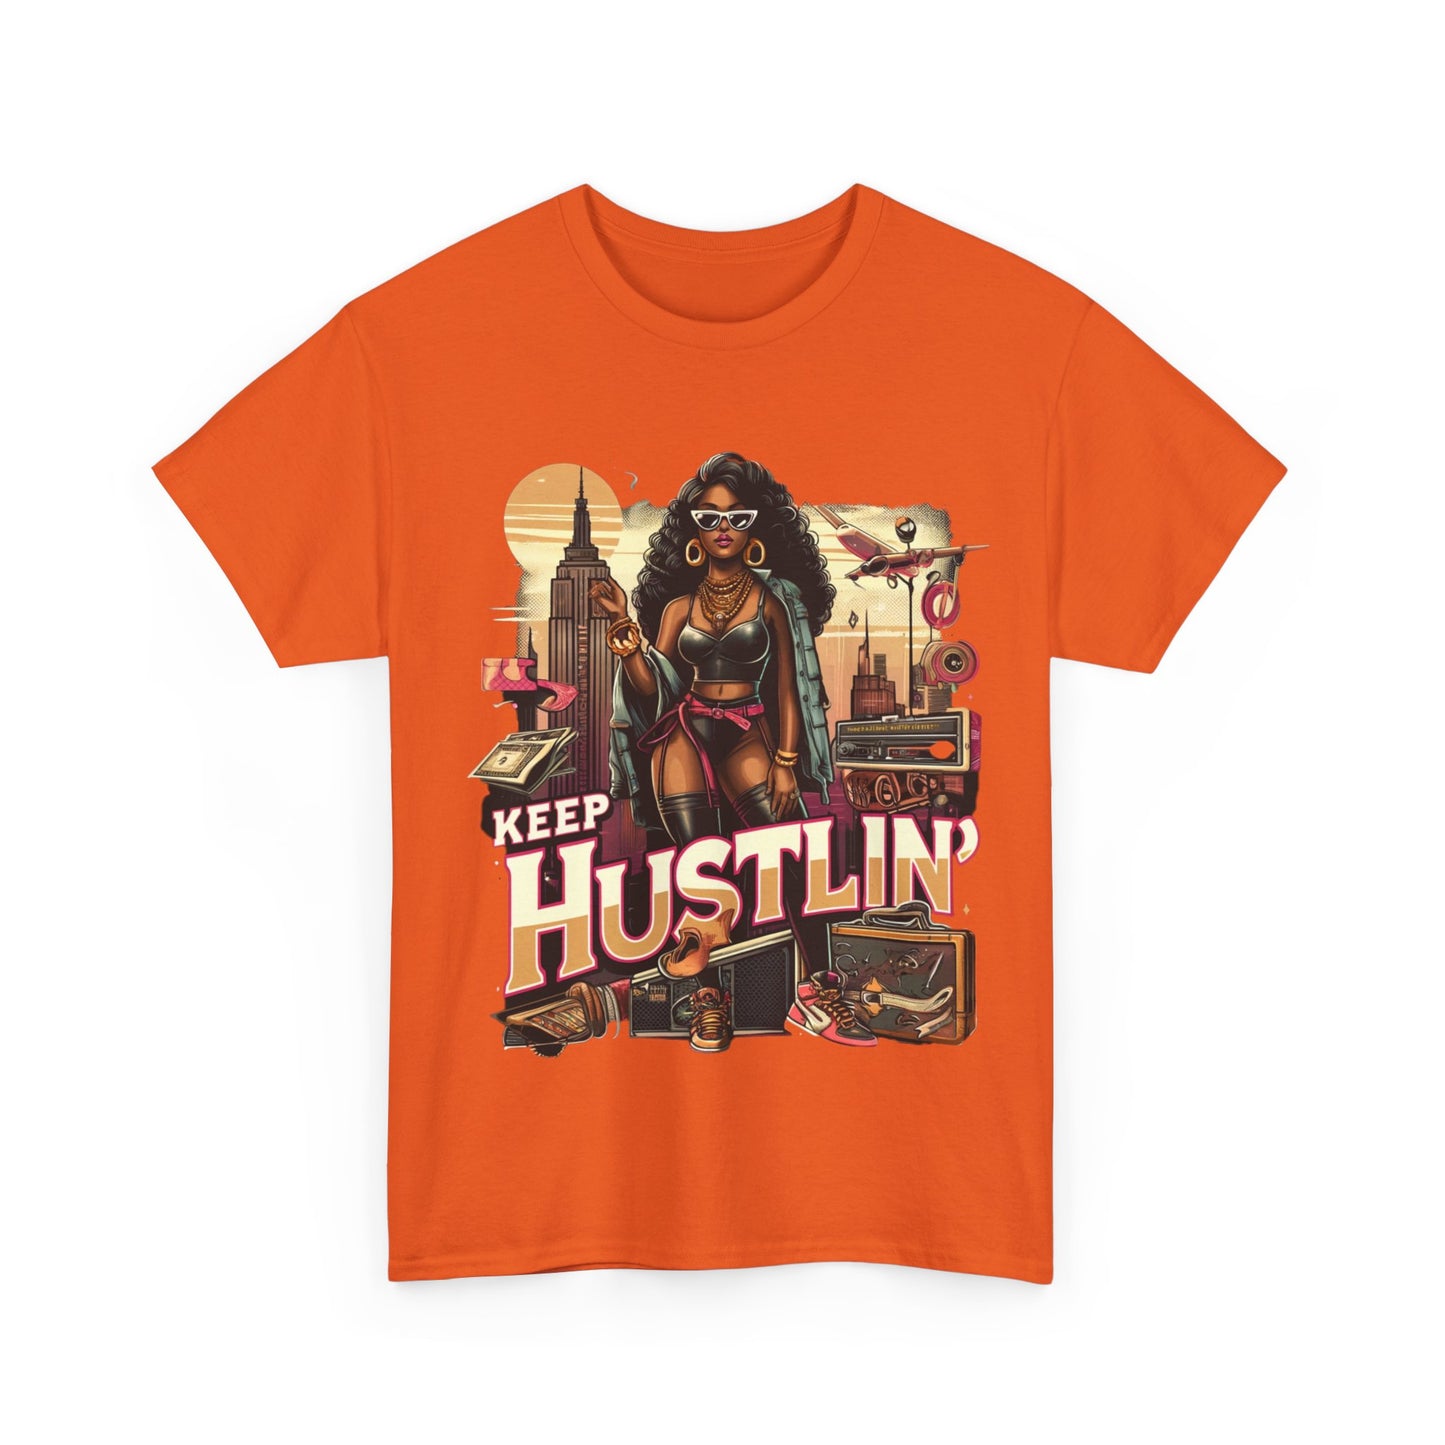 "Keep Hustlin' Tee - Unleash Your Inner Power & Confidence" | Empowering Pin-Up Style Streetwear